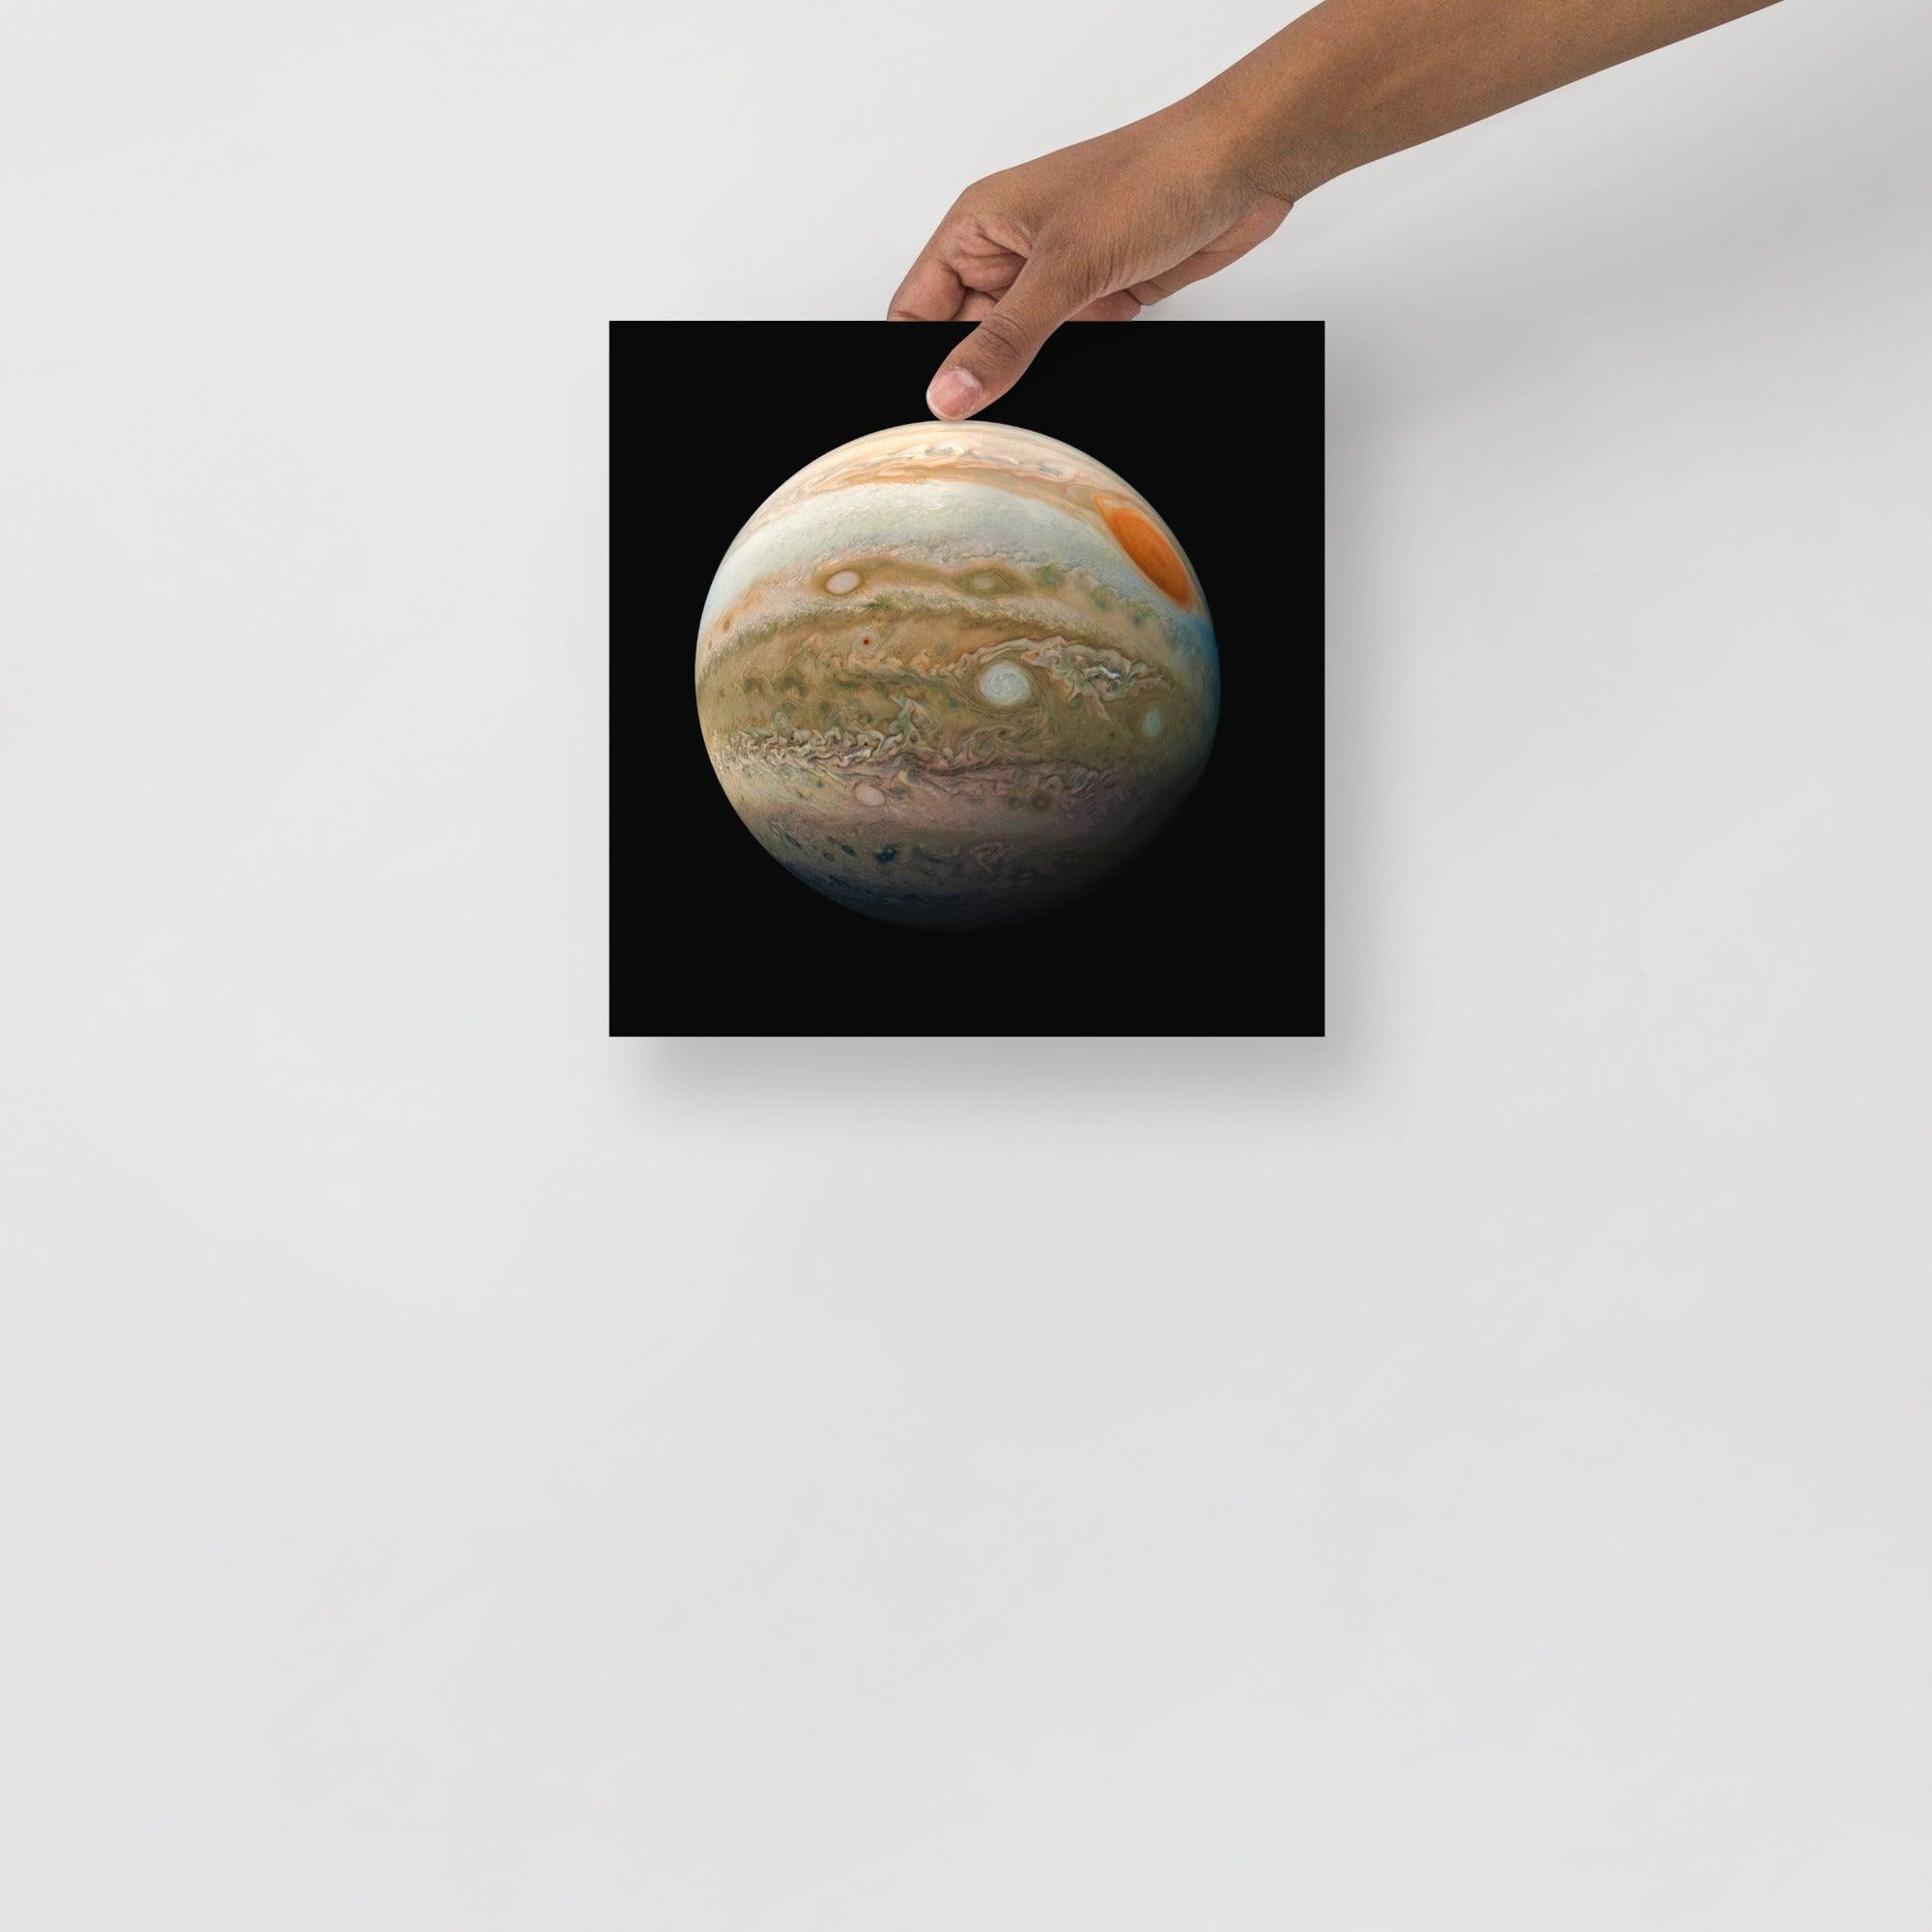 A Planet Jupiter From the Juno Spacecraft poster on a plain backdrop in size 10x10”.